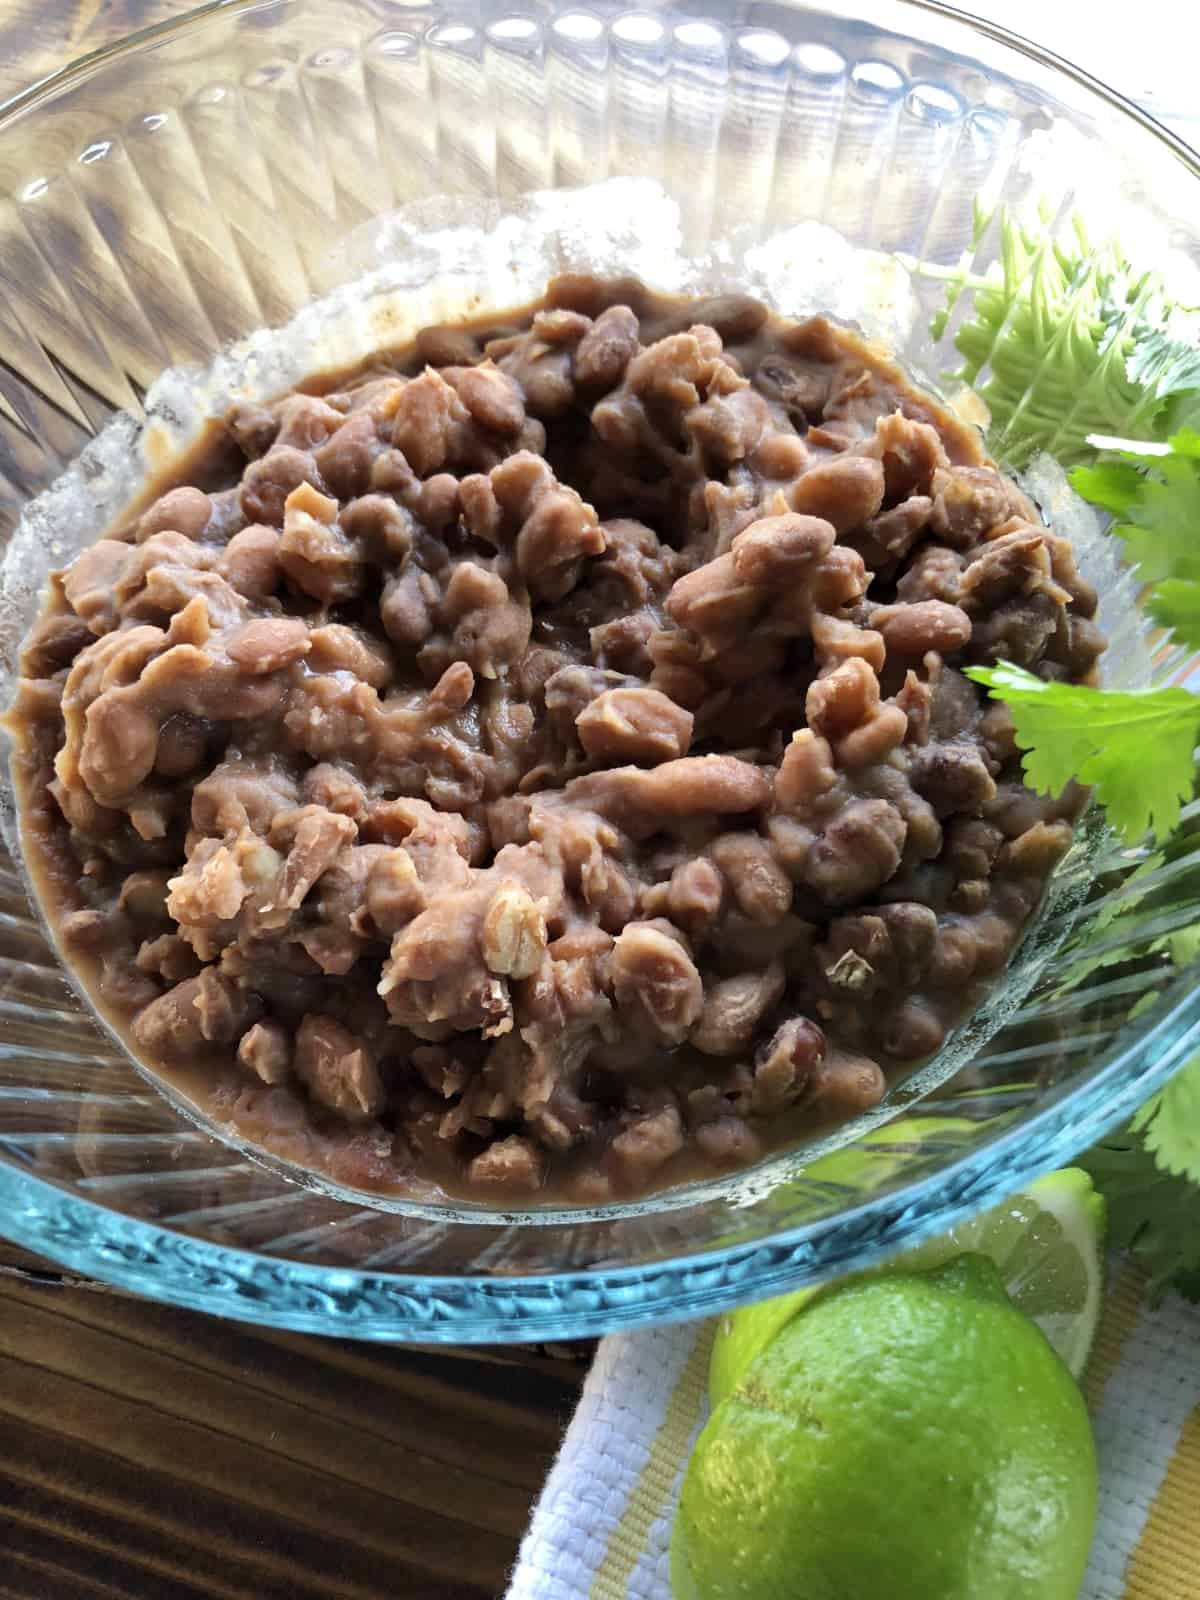 Cooked pinto beans in small glass bowl with fresh limes